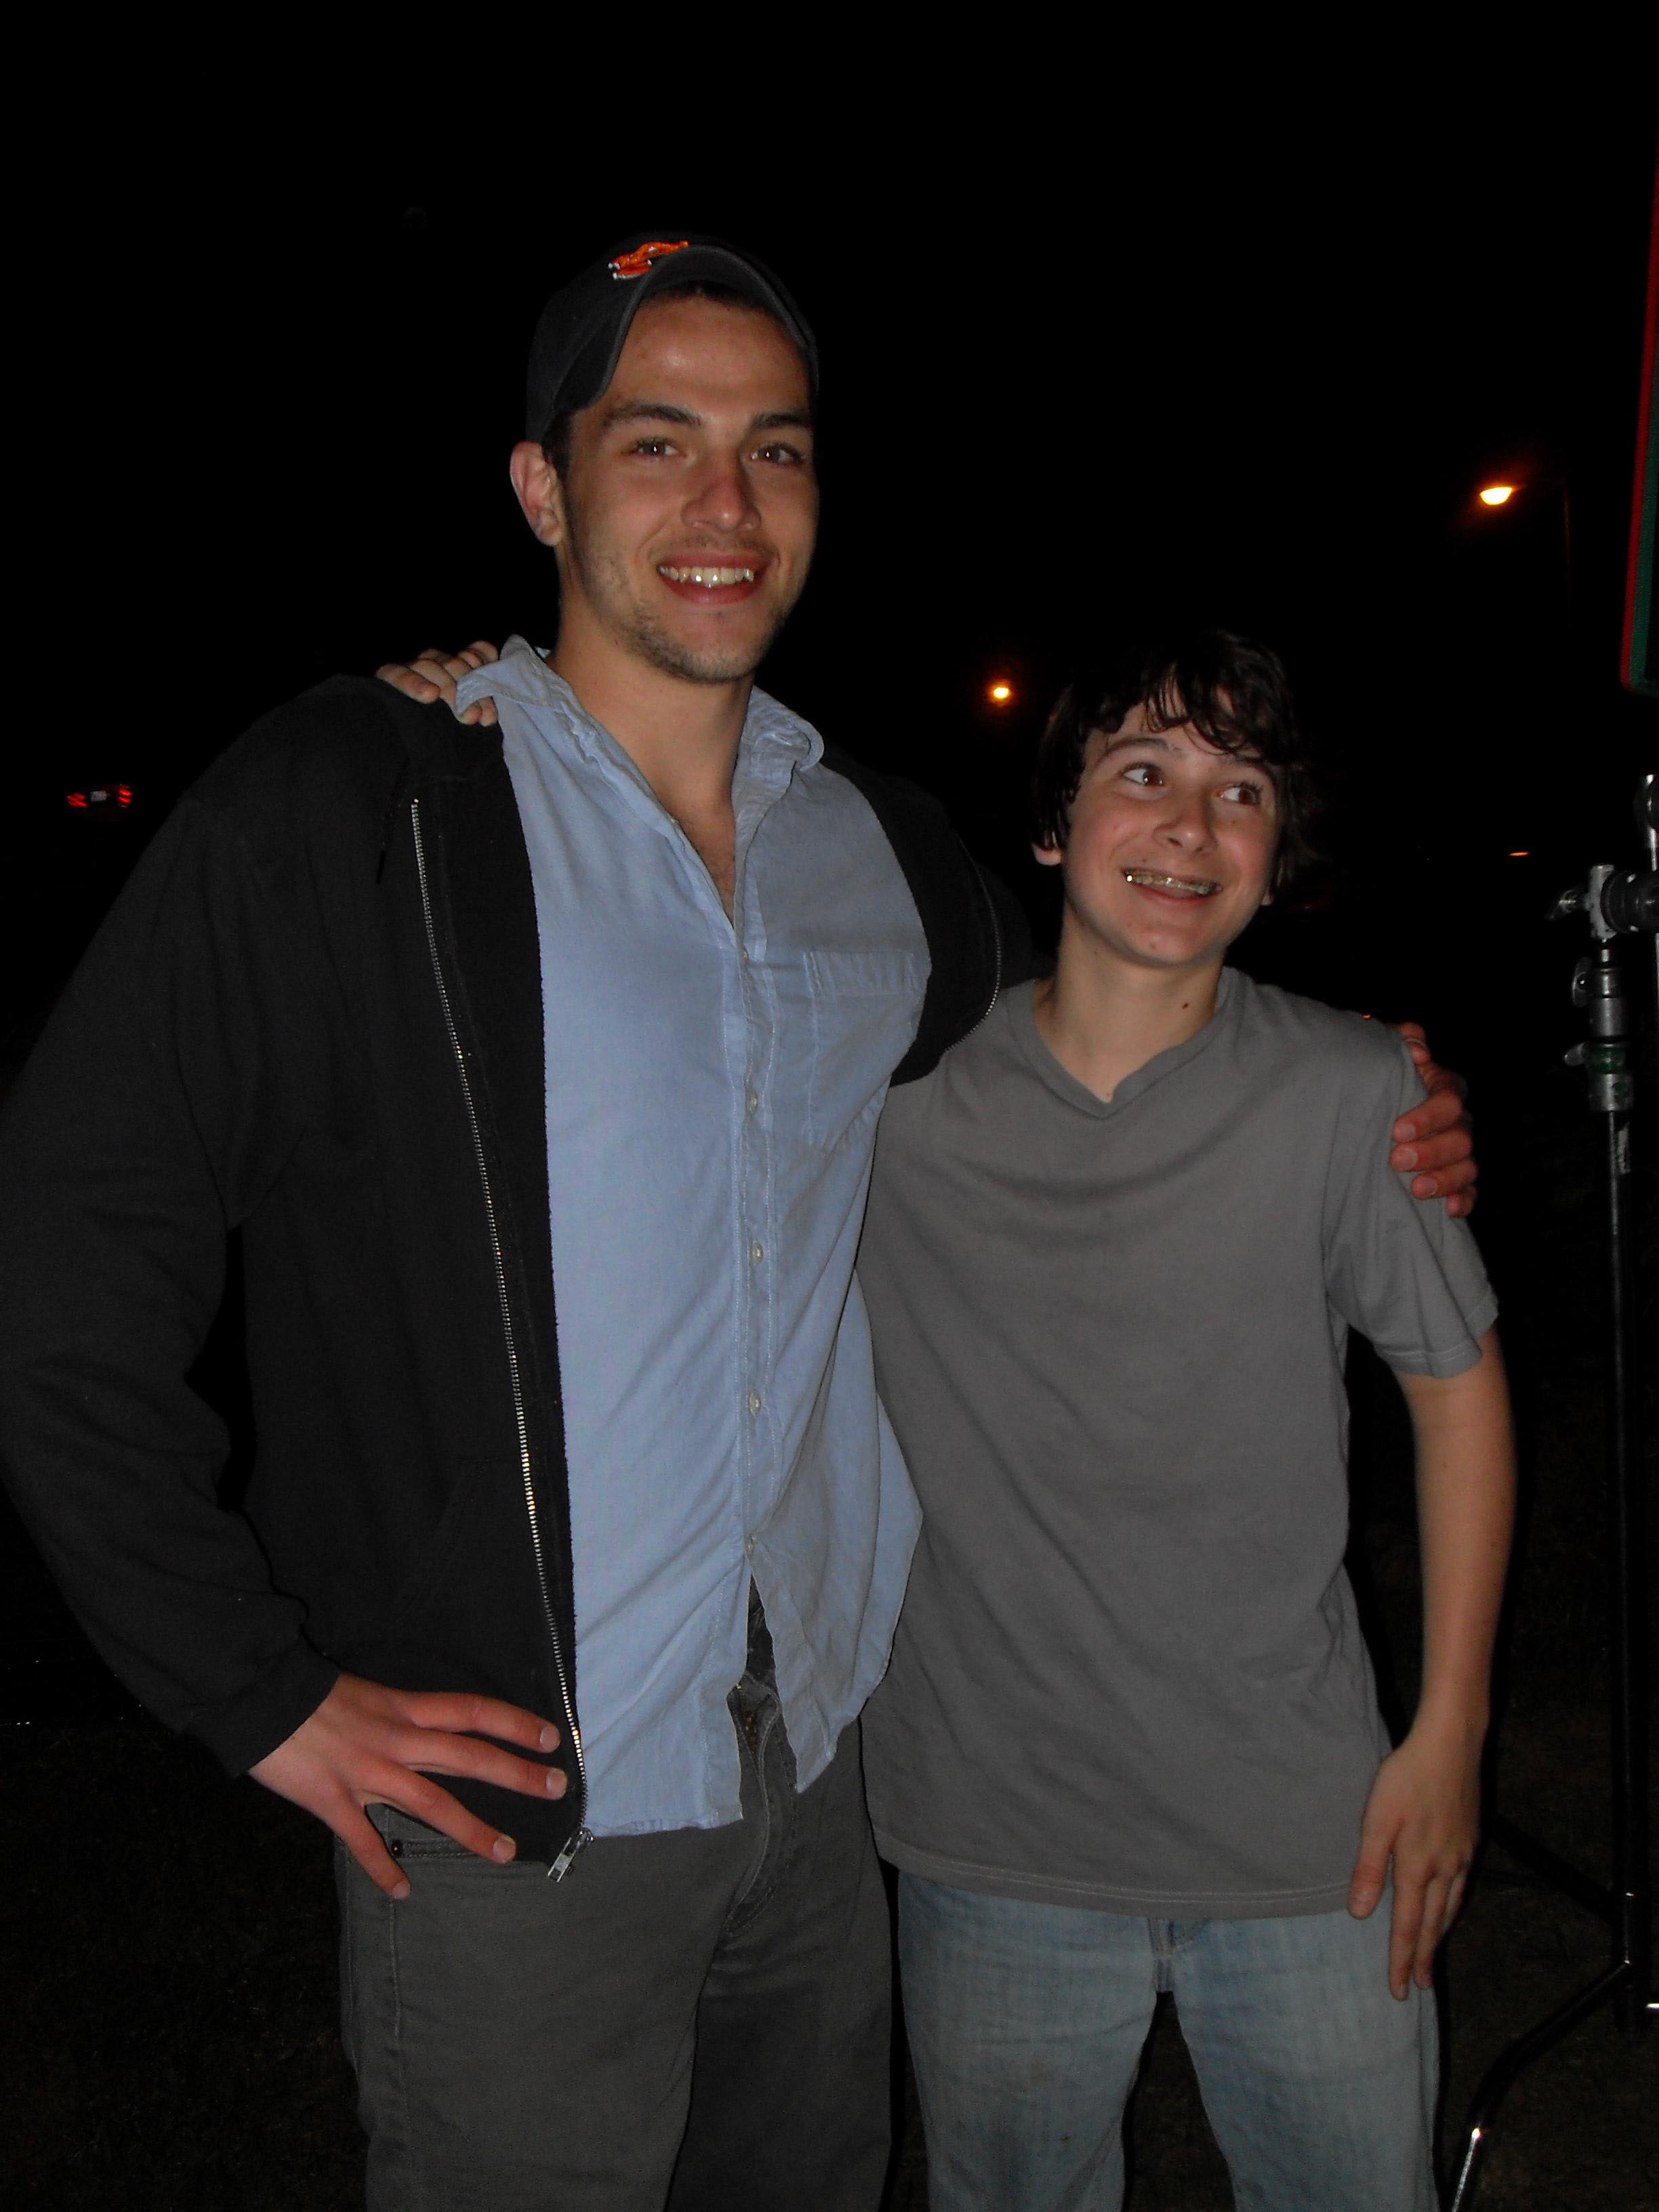 Michael (Voltaire Council) and Writer/Director, Zach Coker on the set of 